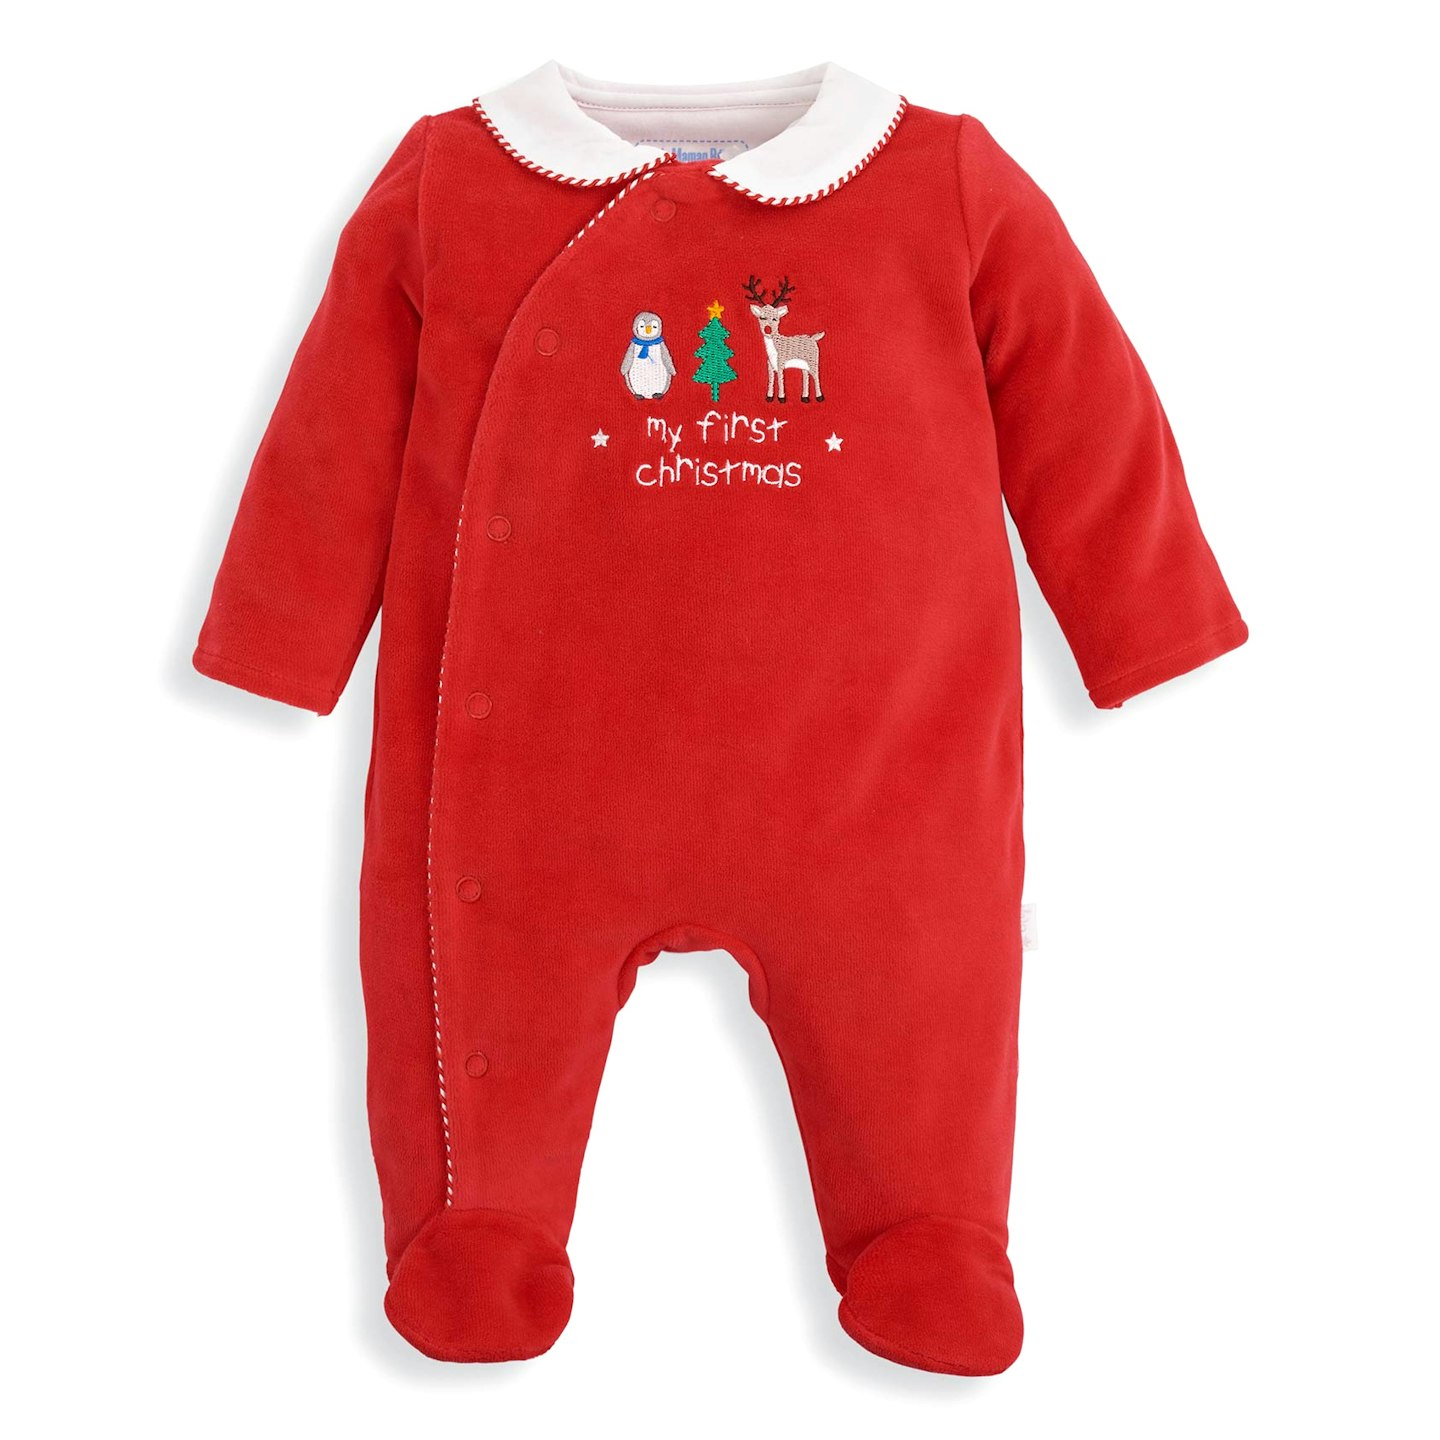 My First Christmas Baby Sleepsuit